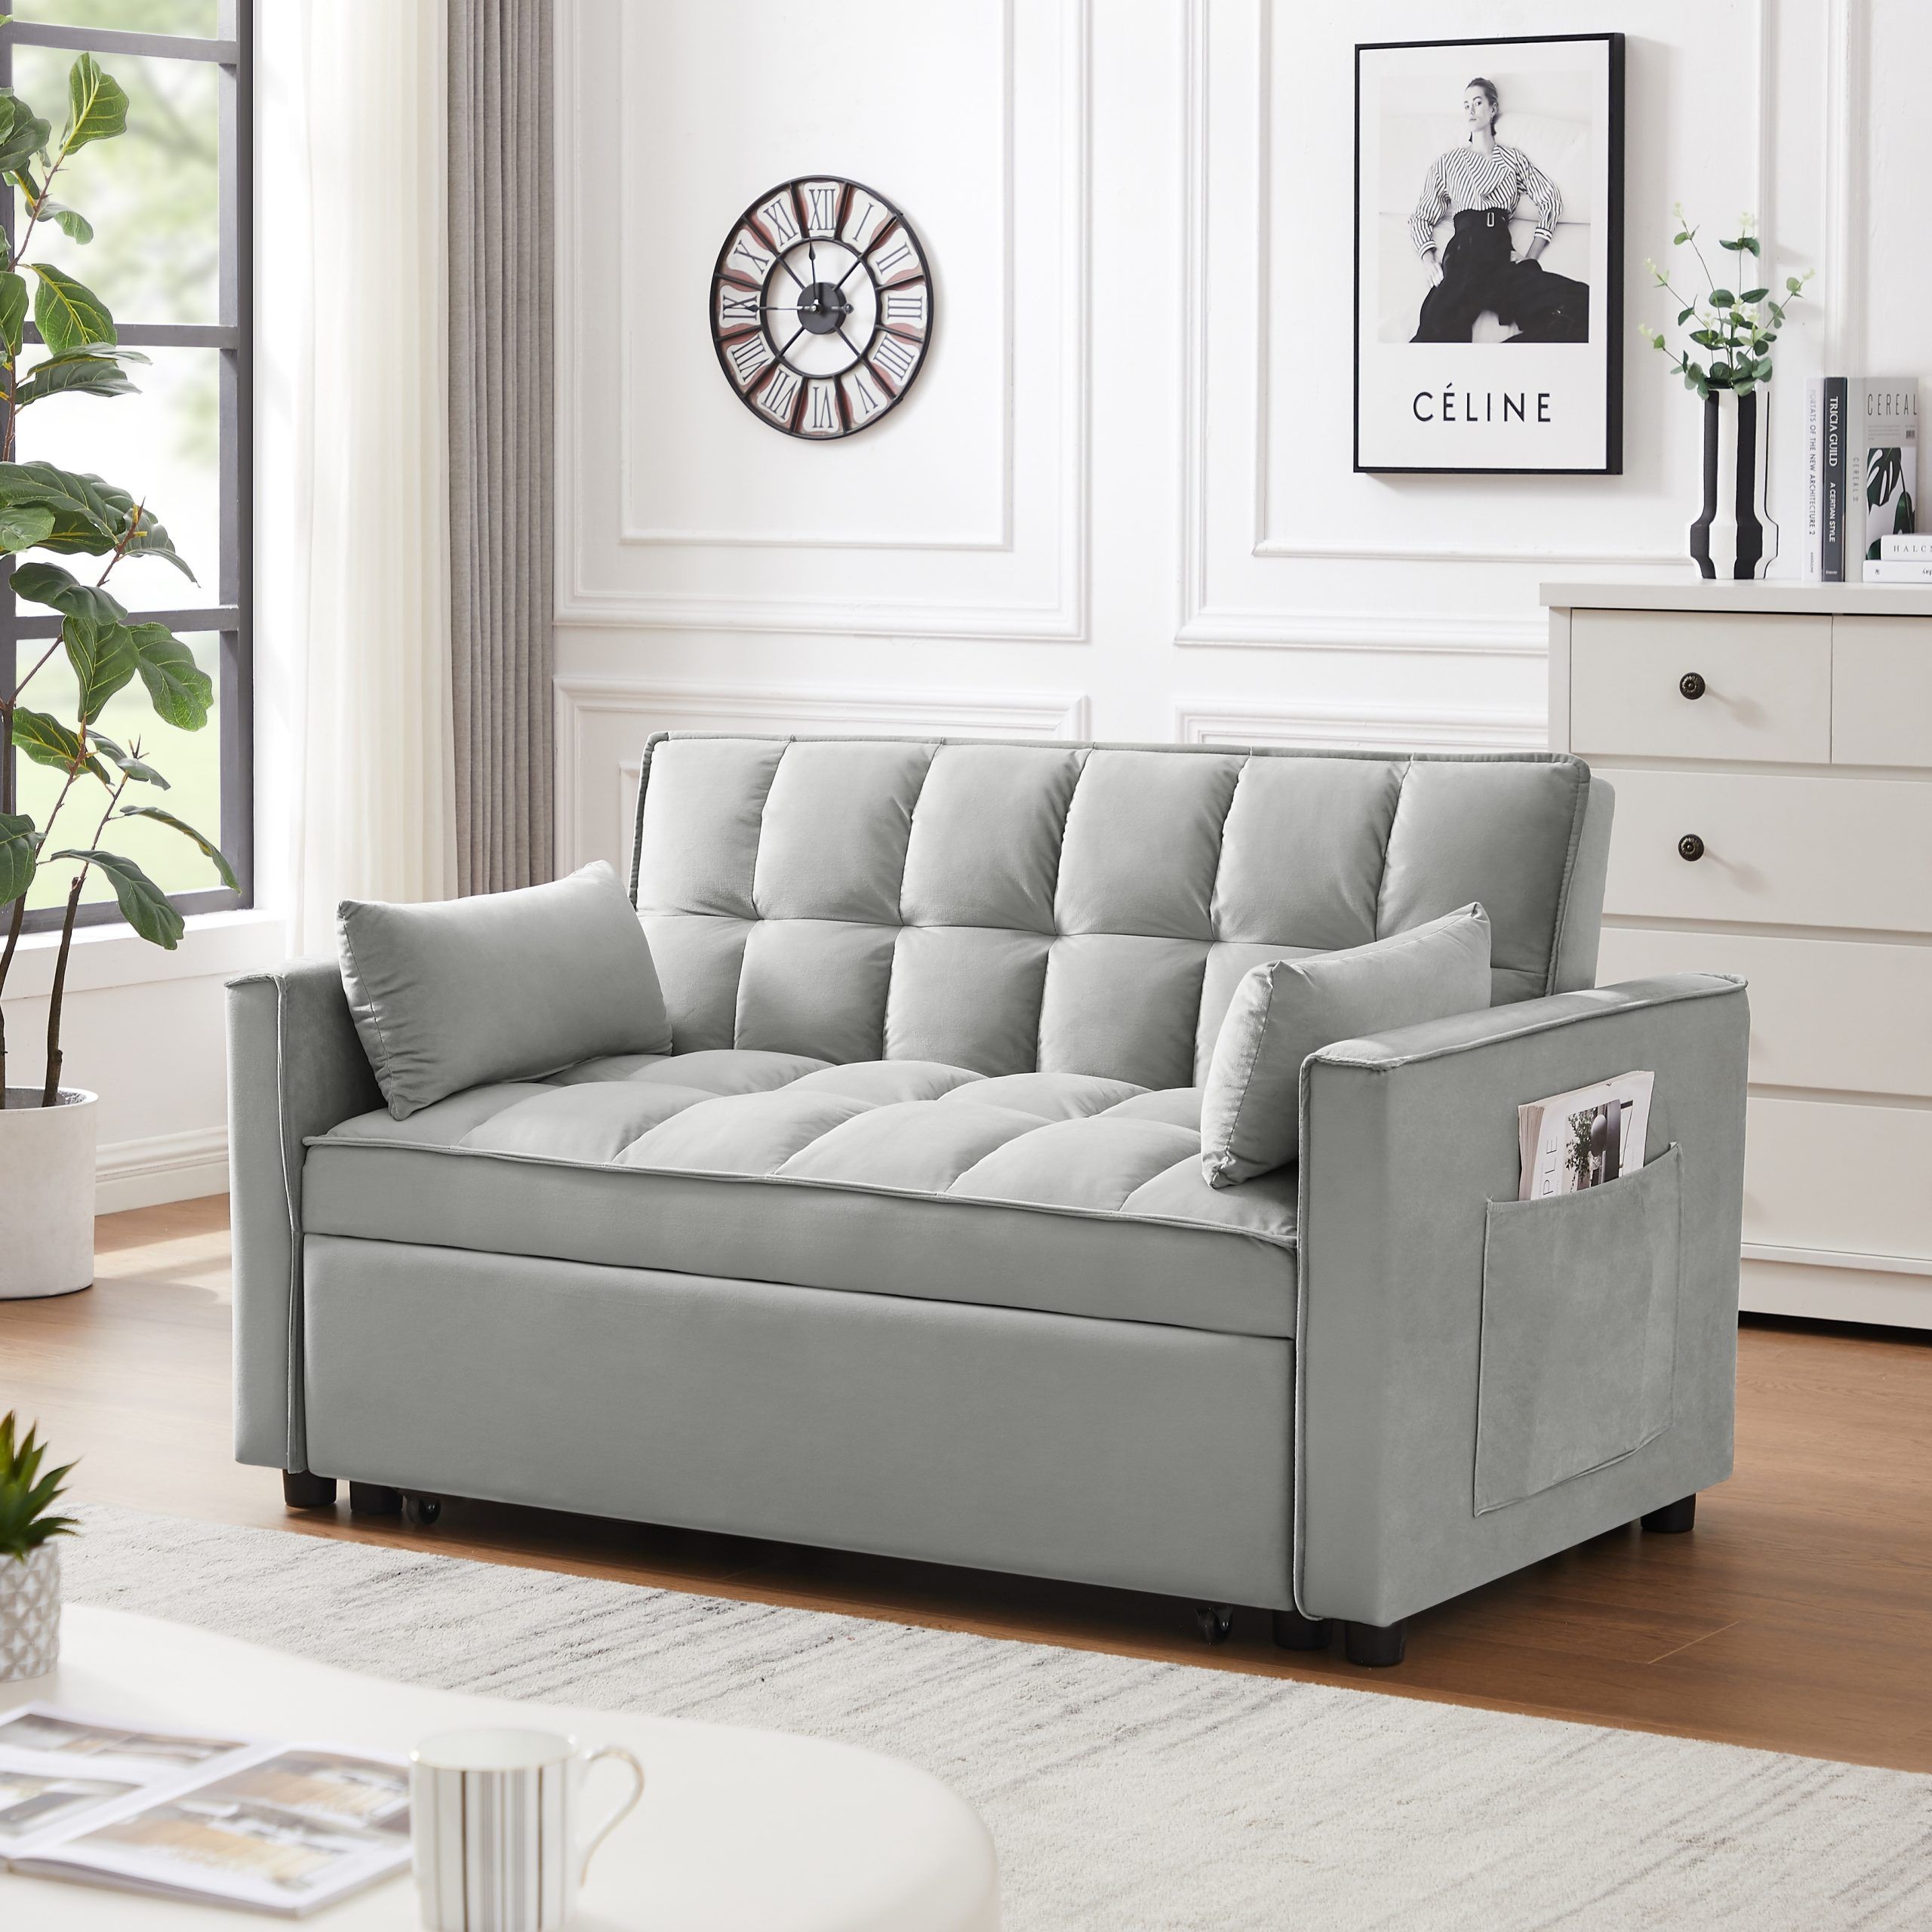 Velvet Loveseat Futon Sofa Pullout Bed, 3 In 1 Convertible Sleeper Sofa Bed  – Bed Bath & Beyond – 38908553 Intended For 3 In 1 Gray Pull Out Sleeper Sofas (View 6 of 15)